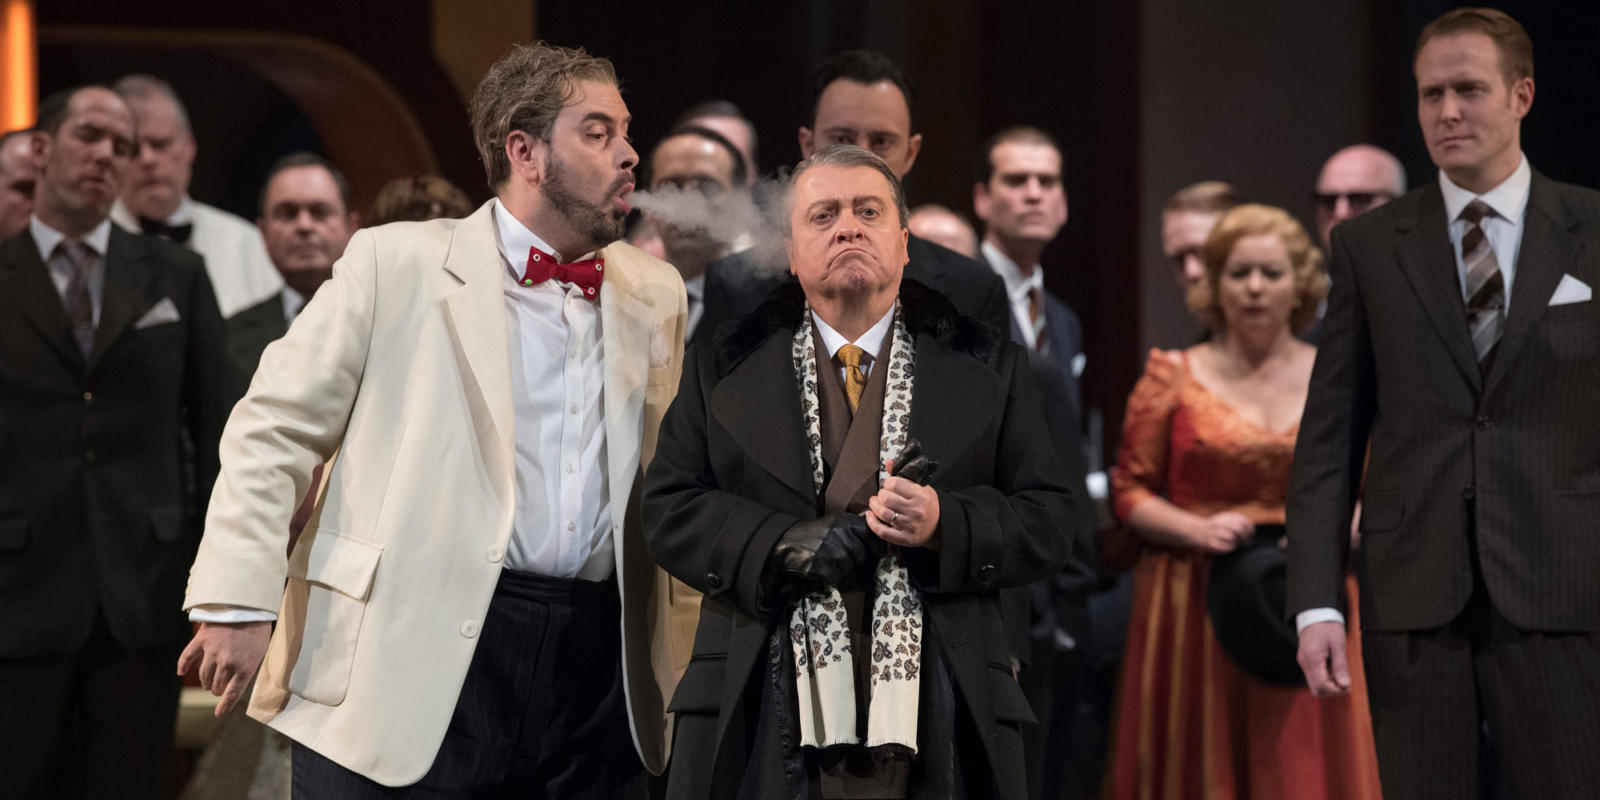 man in white suit blows smoke in the face of man in black suit on stage of Rigoletto